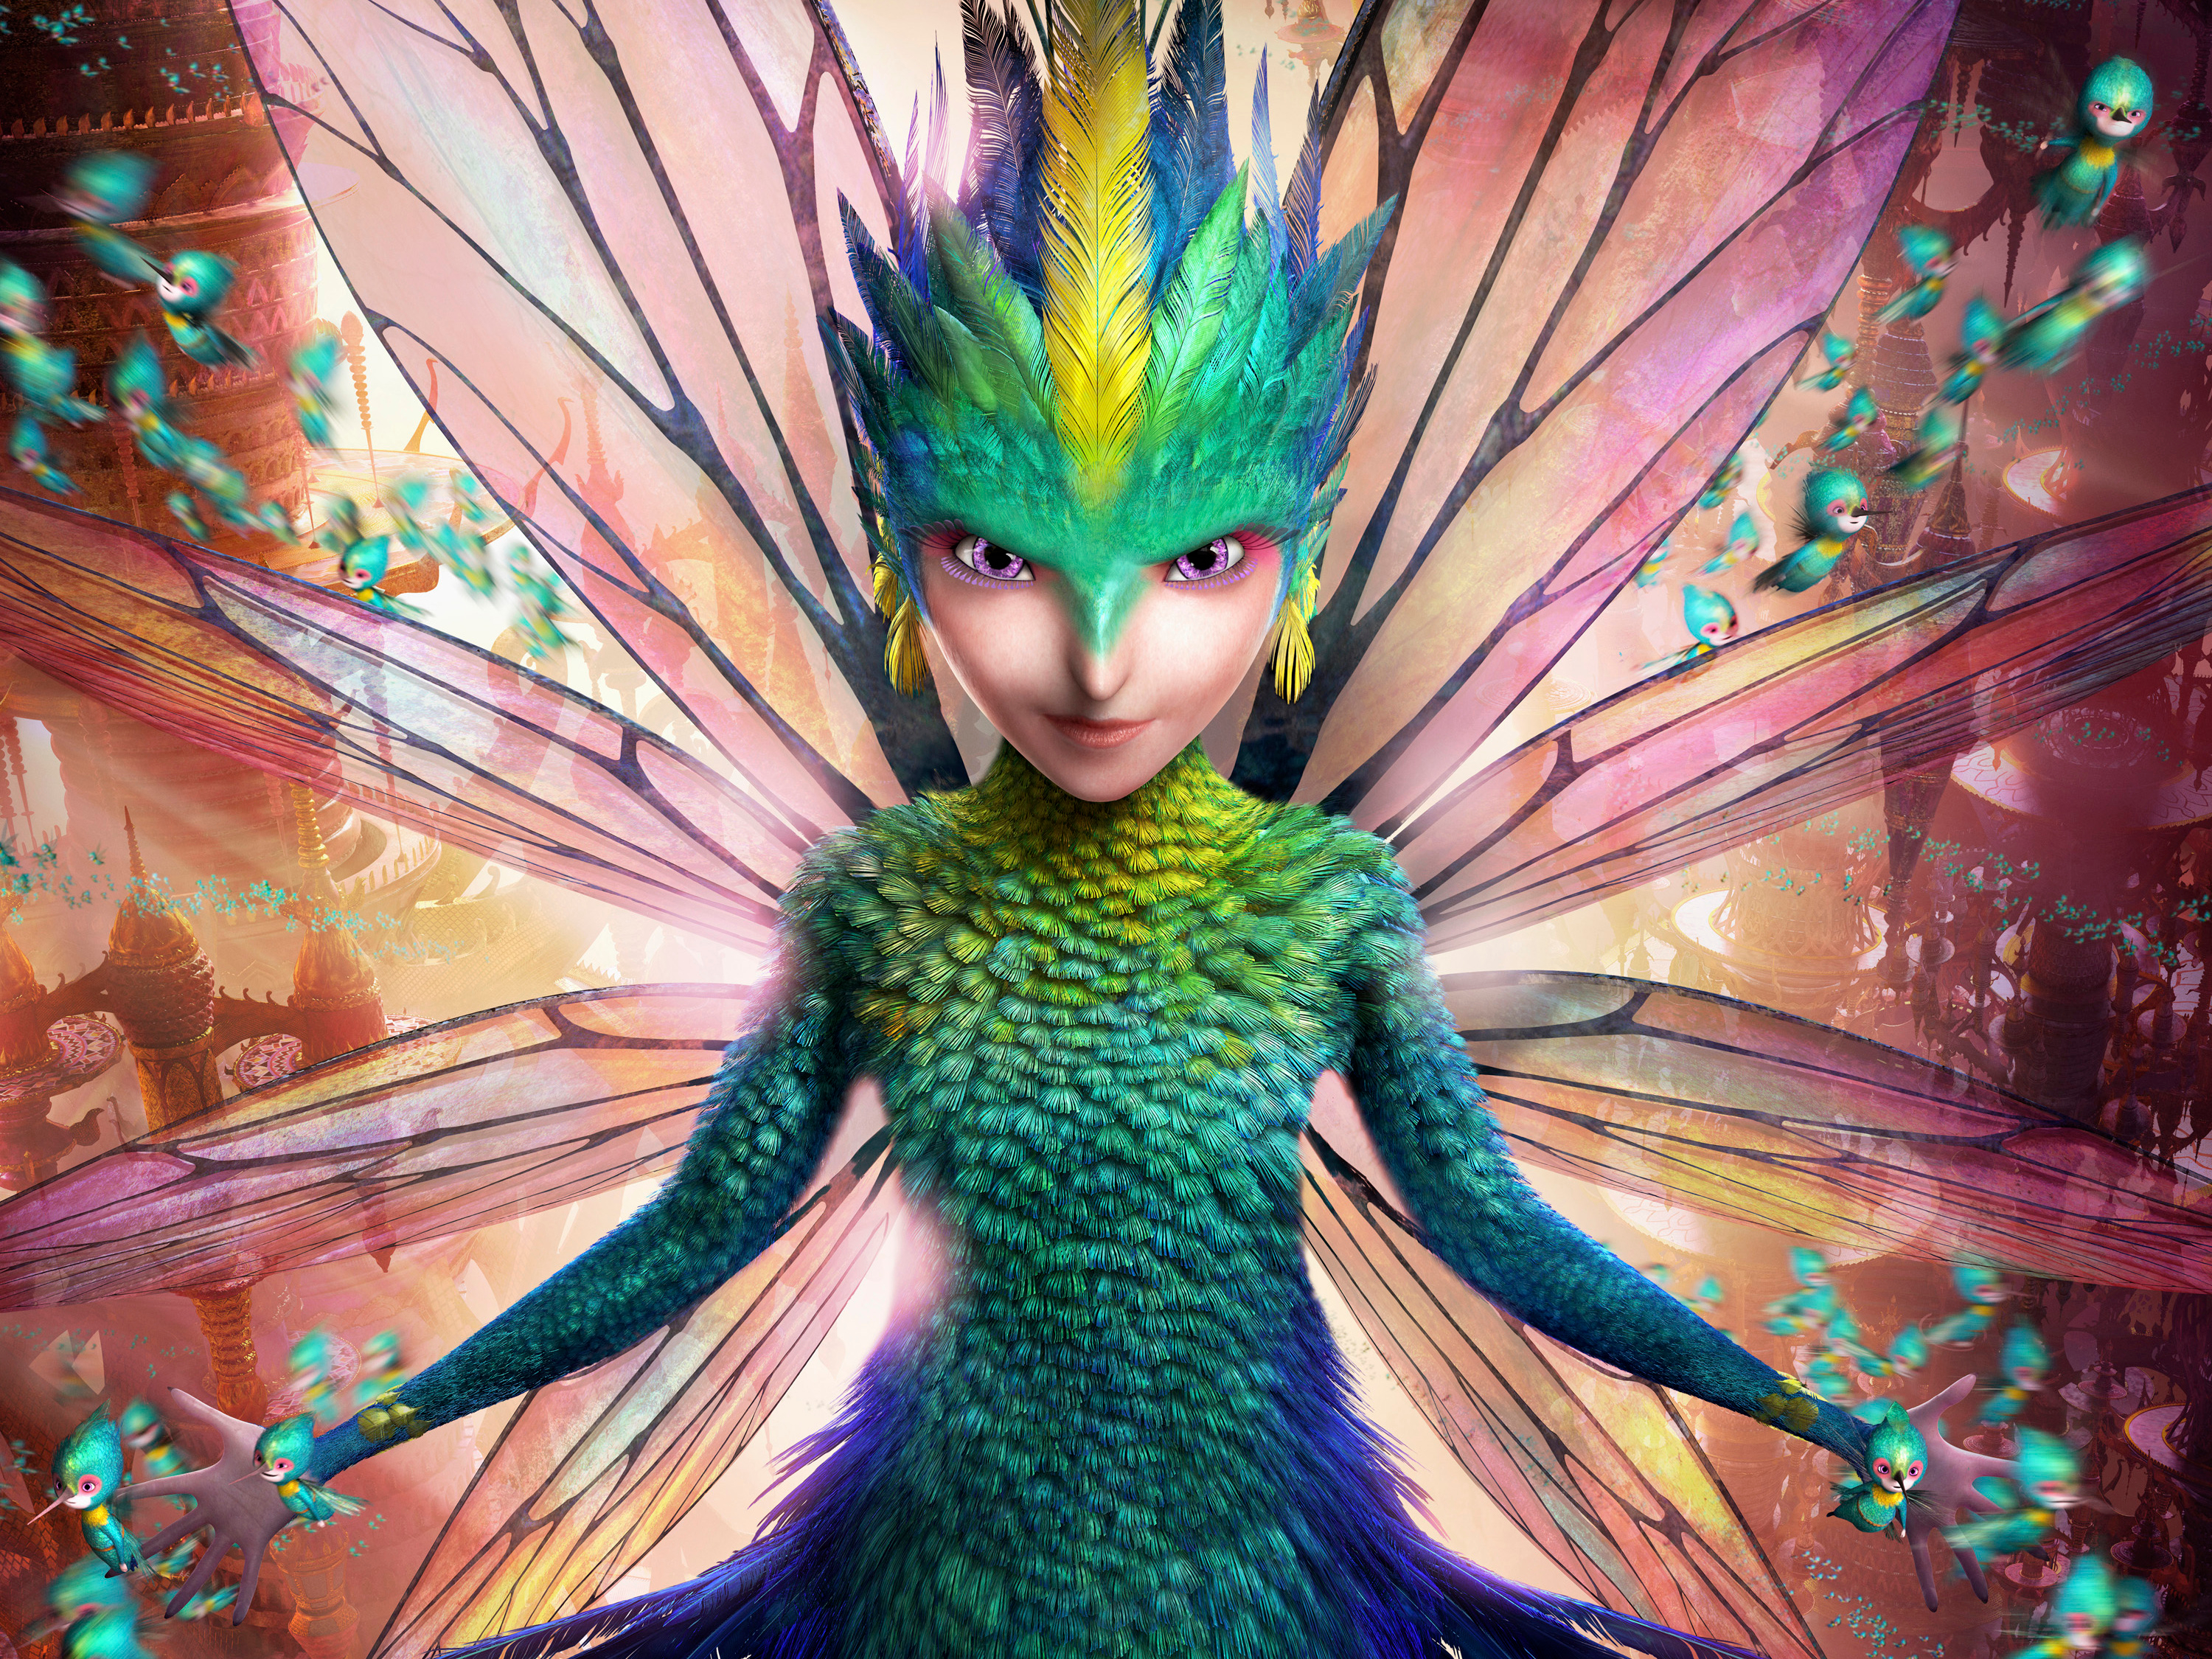 Movie Rise Of The Guardians HD Wallpaper